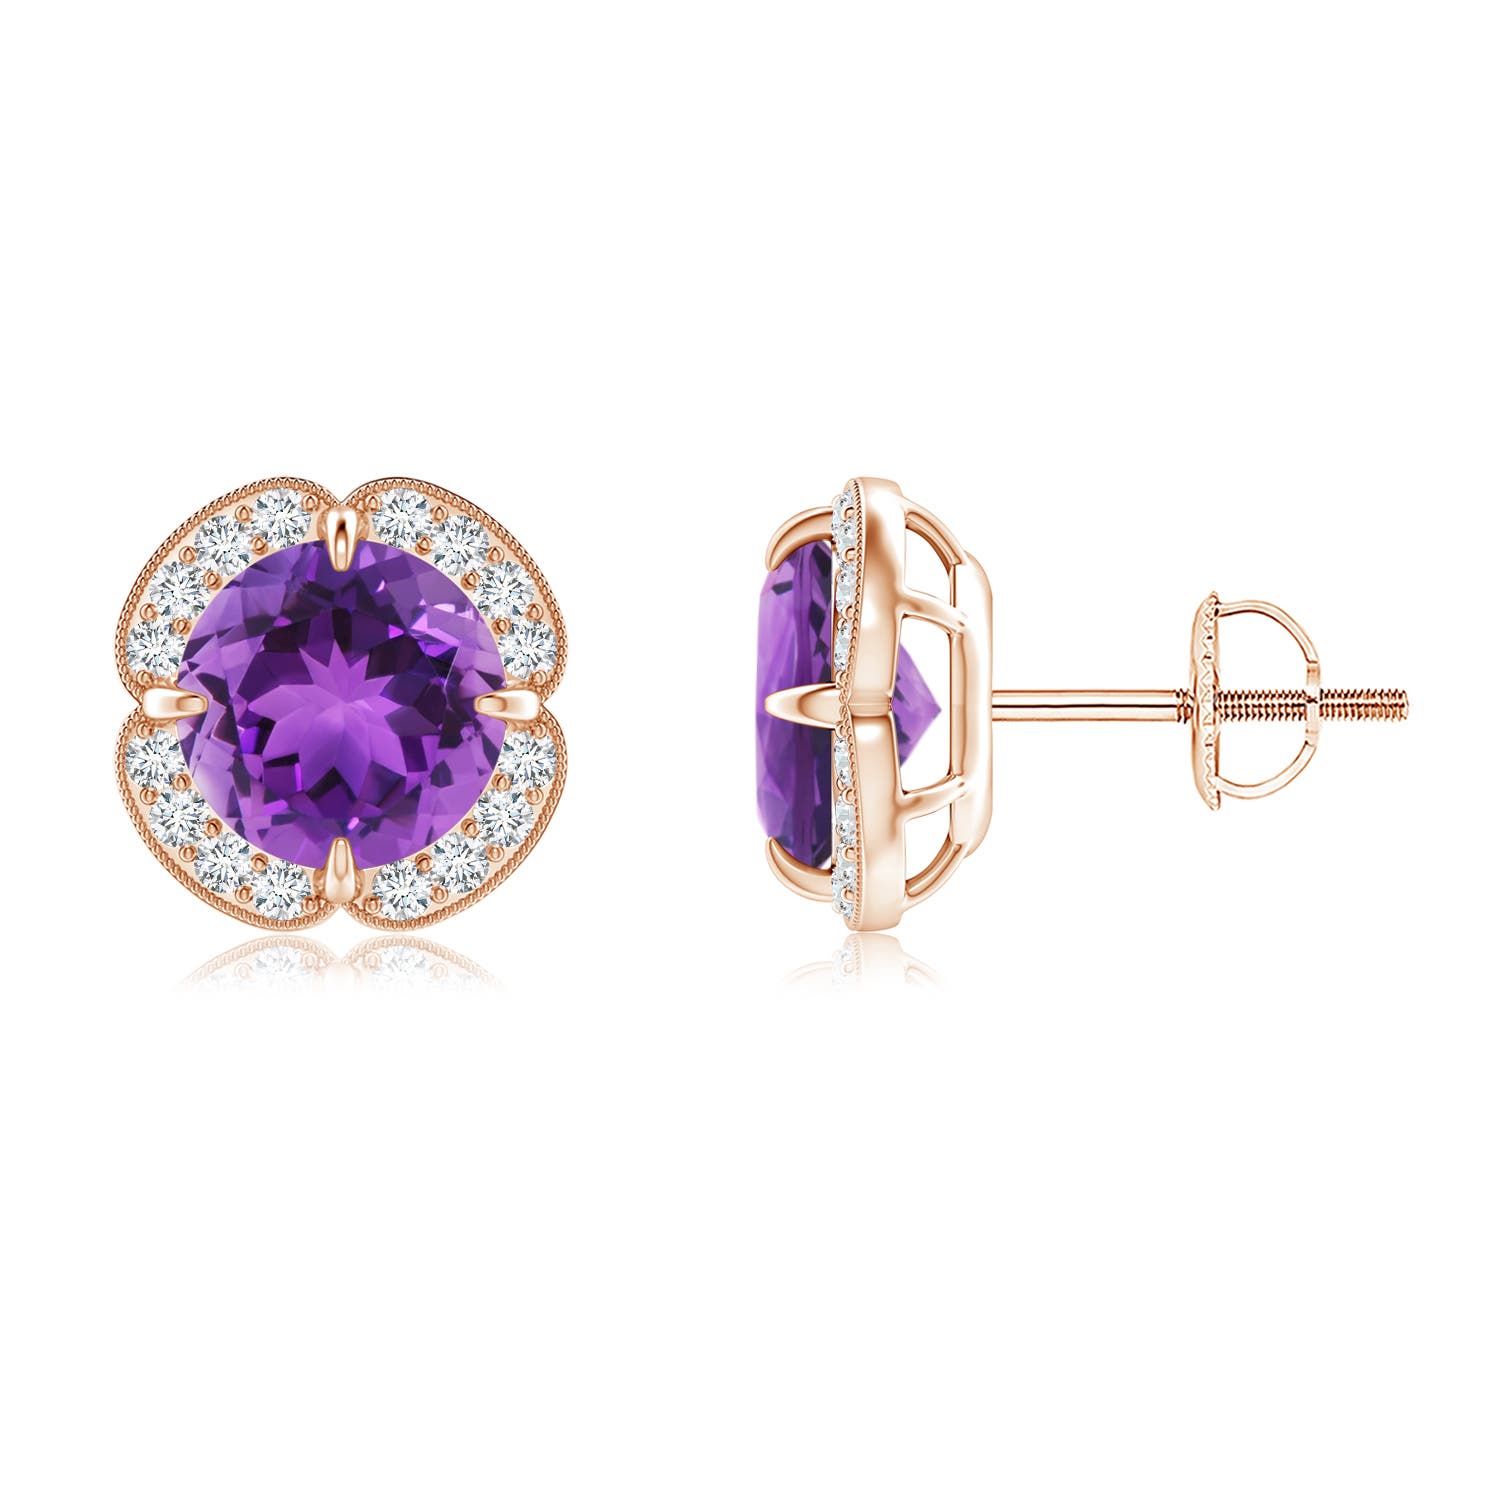 AAA - Amethyst / 2.56 CT / 14 KT Rose Gold